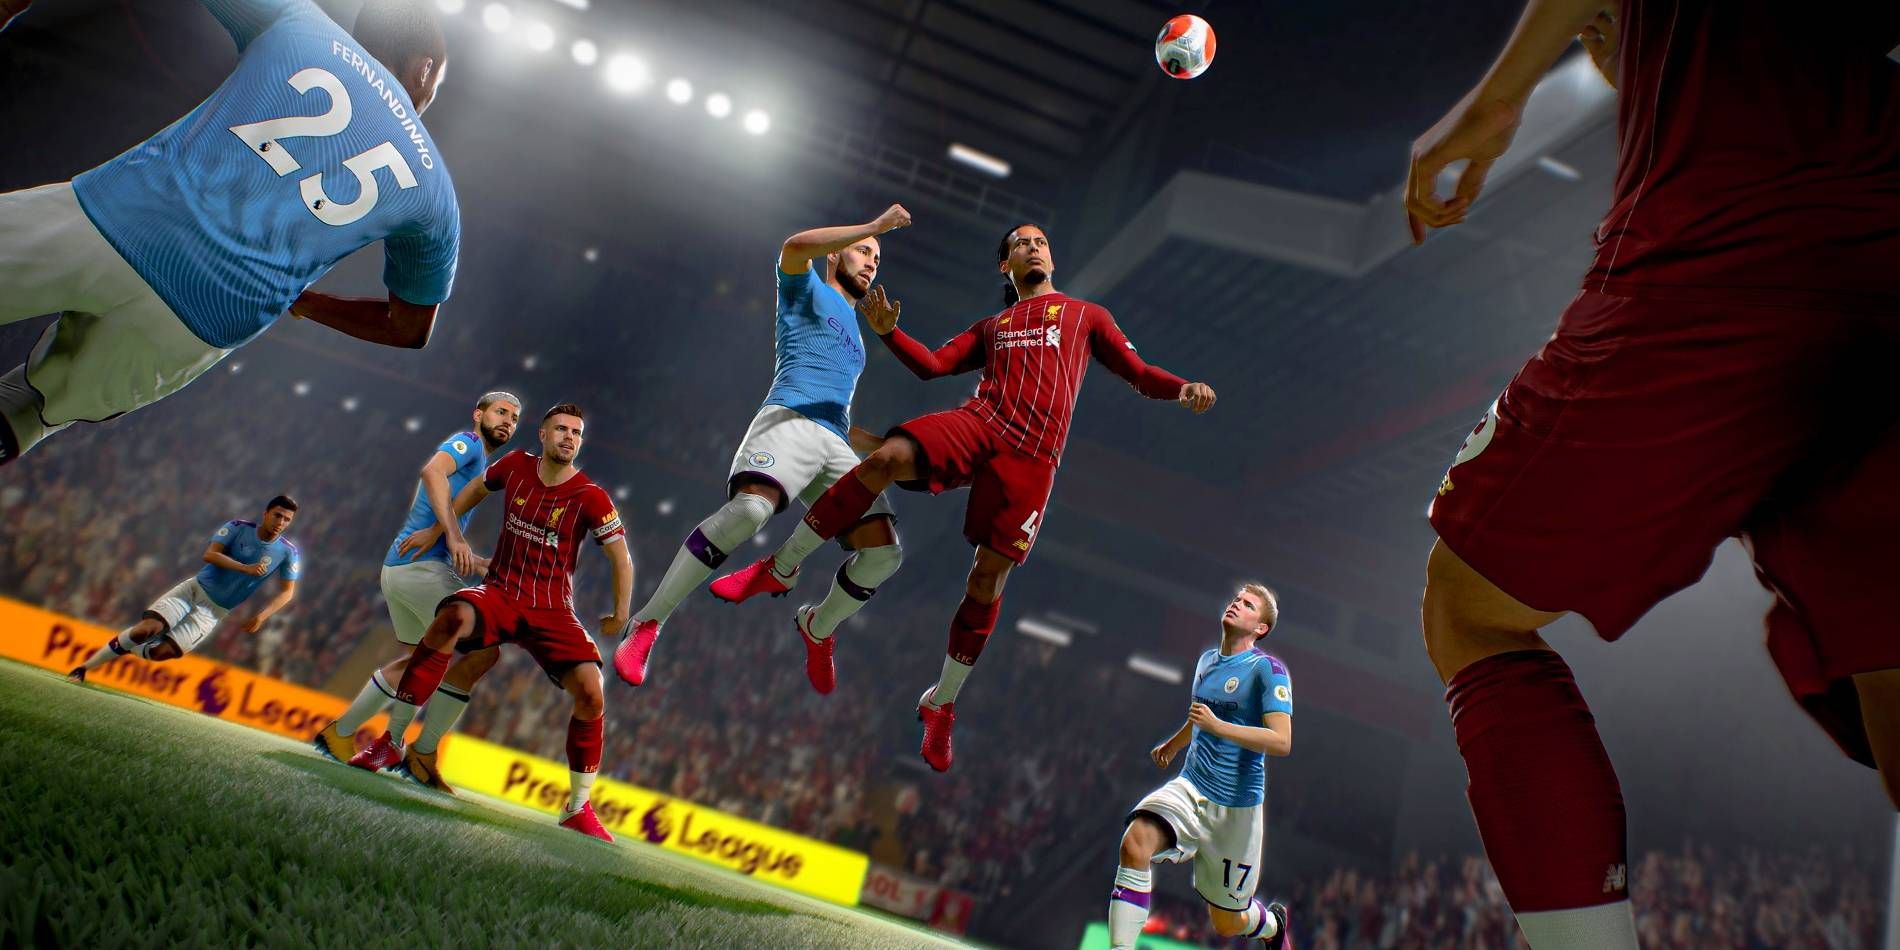 FIFA 21 Athlete in Red Uniform Jumping Up to Perform Shot on Goal Using Manual Header Against Player in Blue Uniform